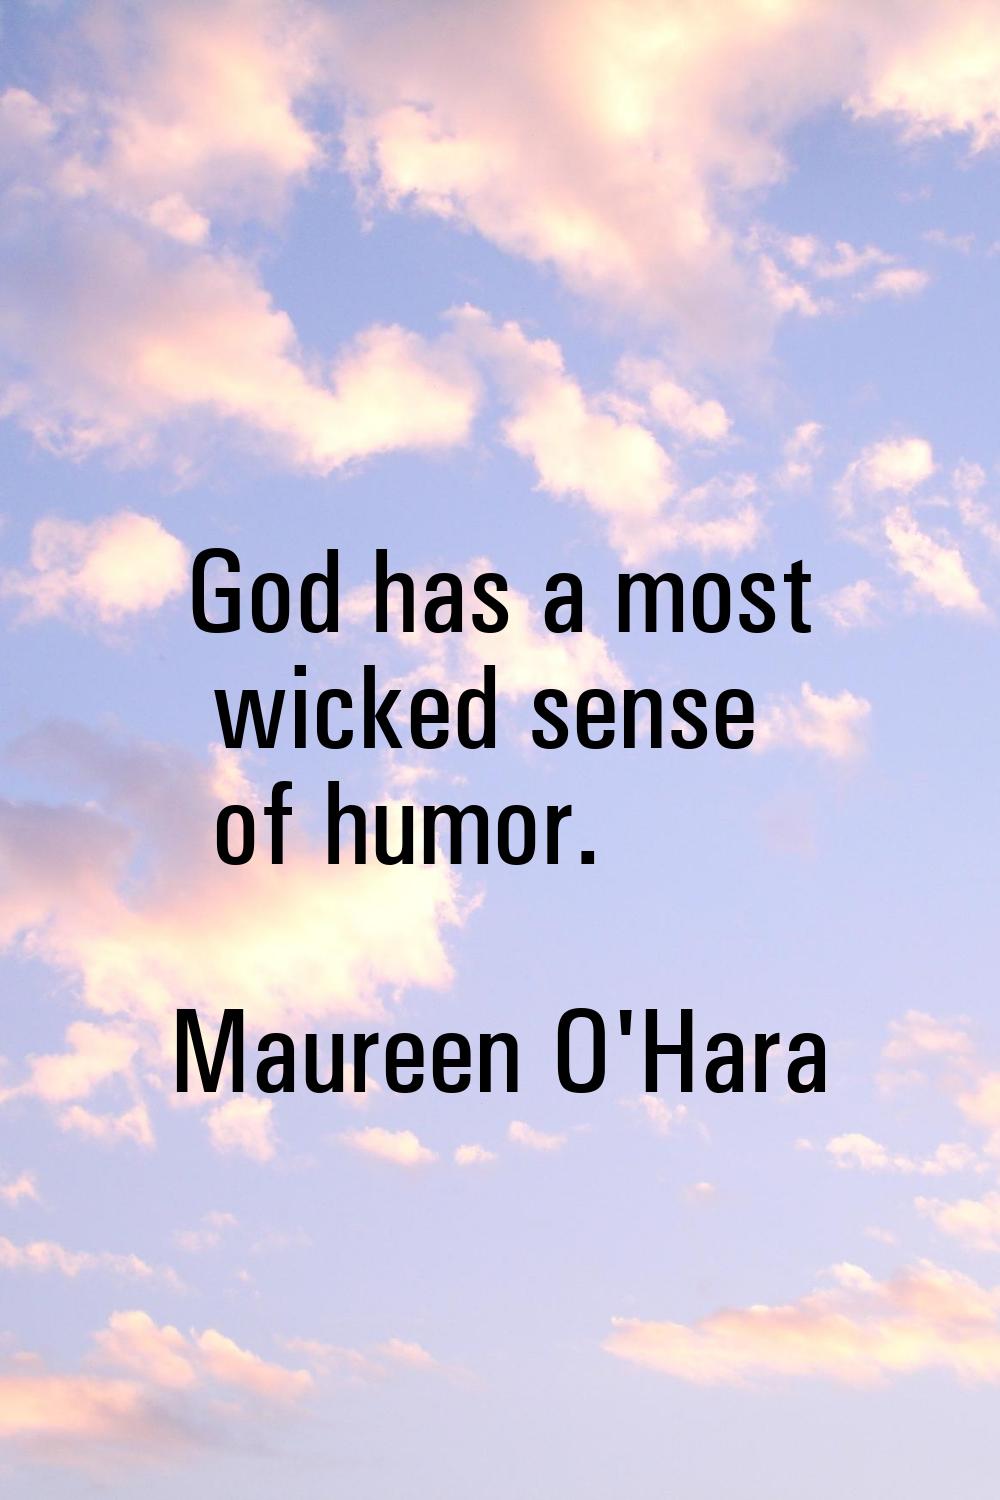 God has a most wicked sense of humor.